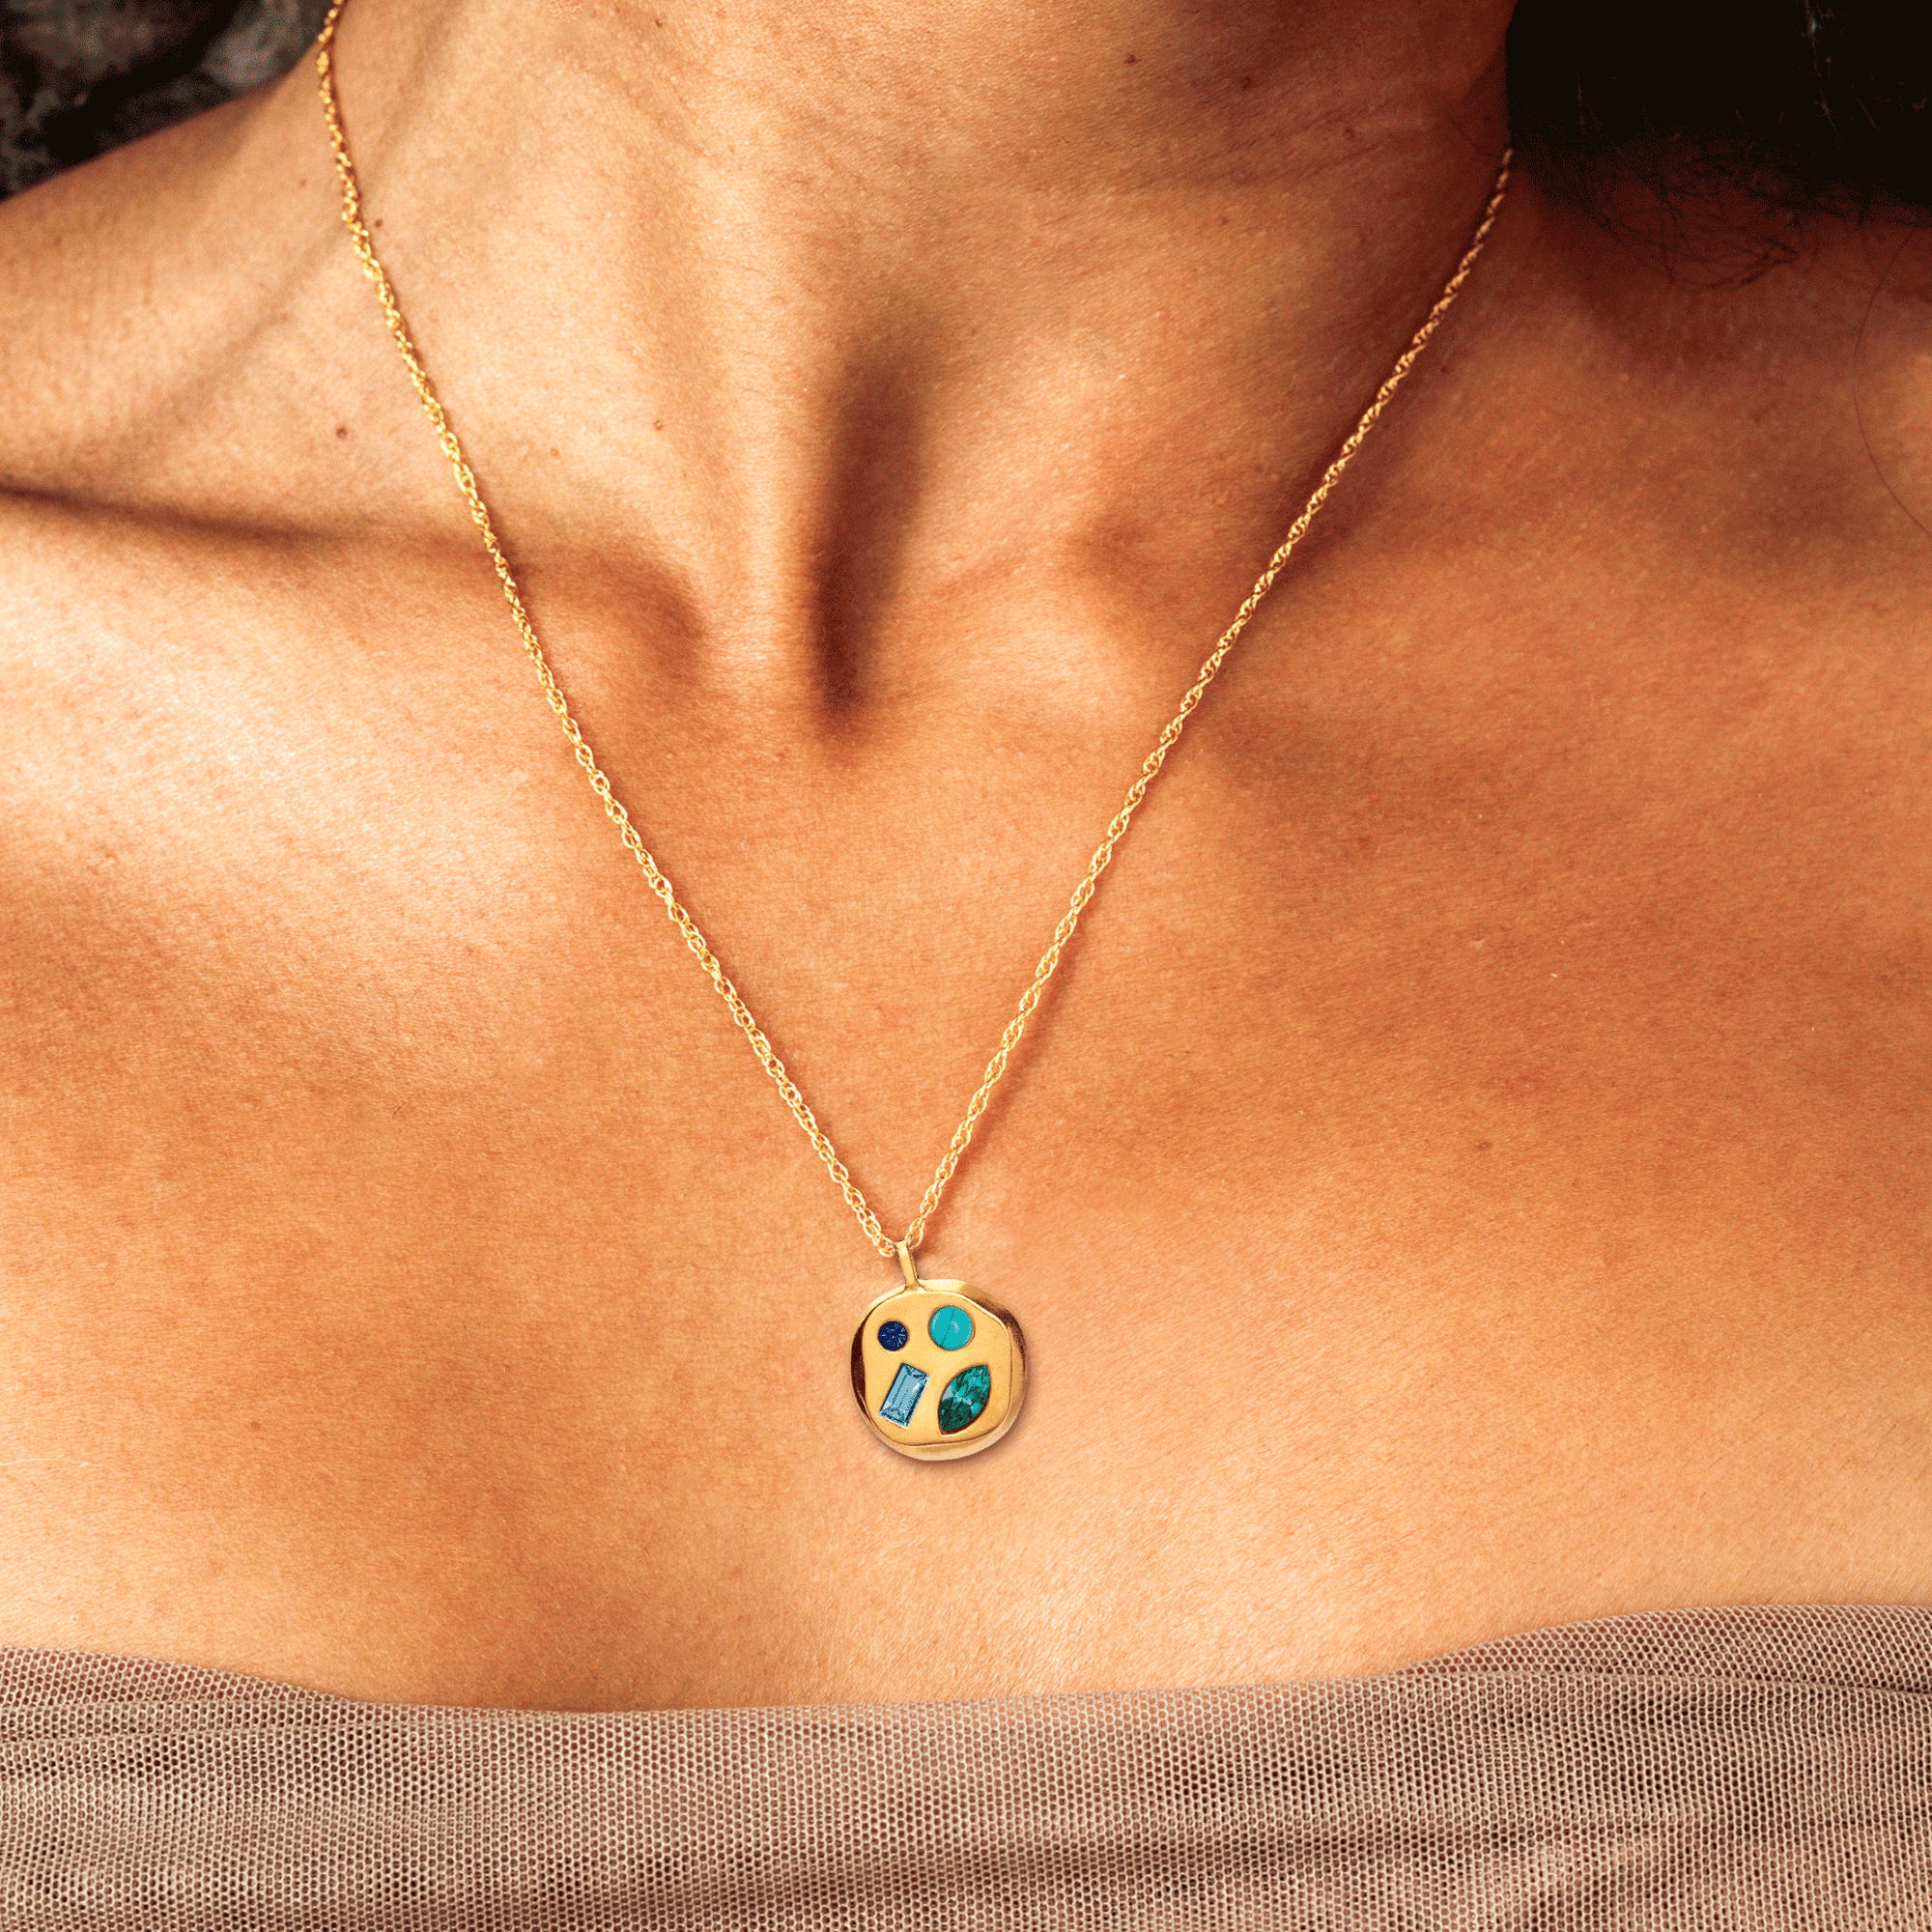 Person wearing The May Seventeenth Pendant